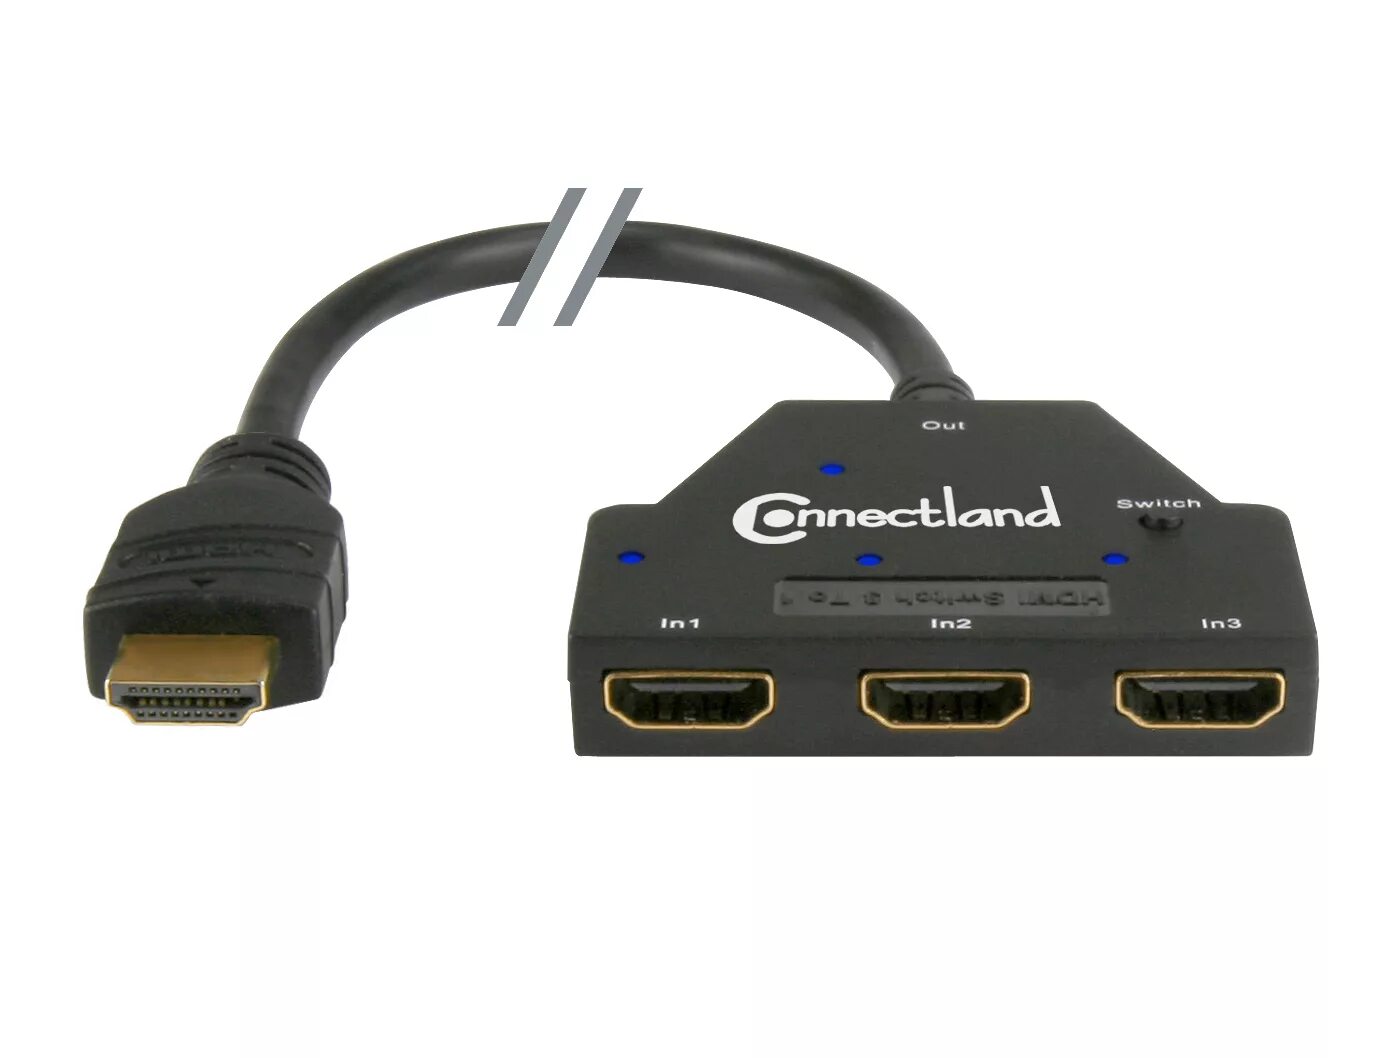 Hdmi support